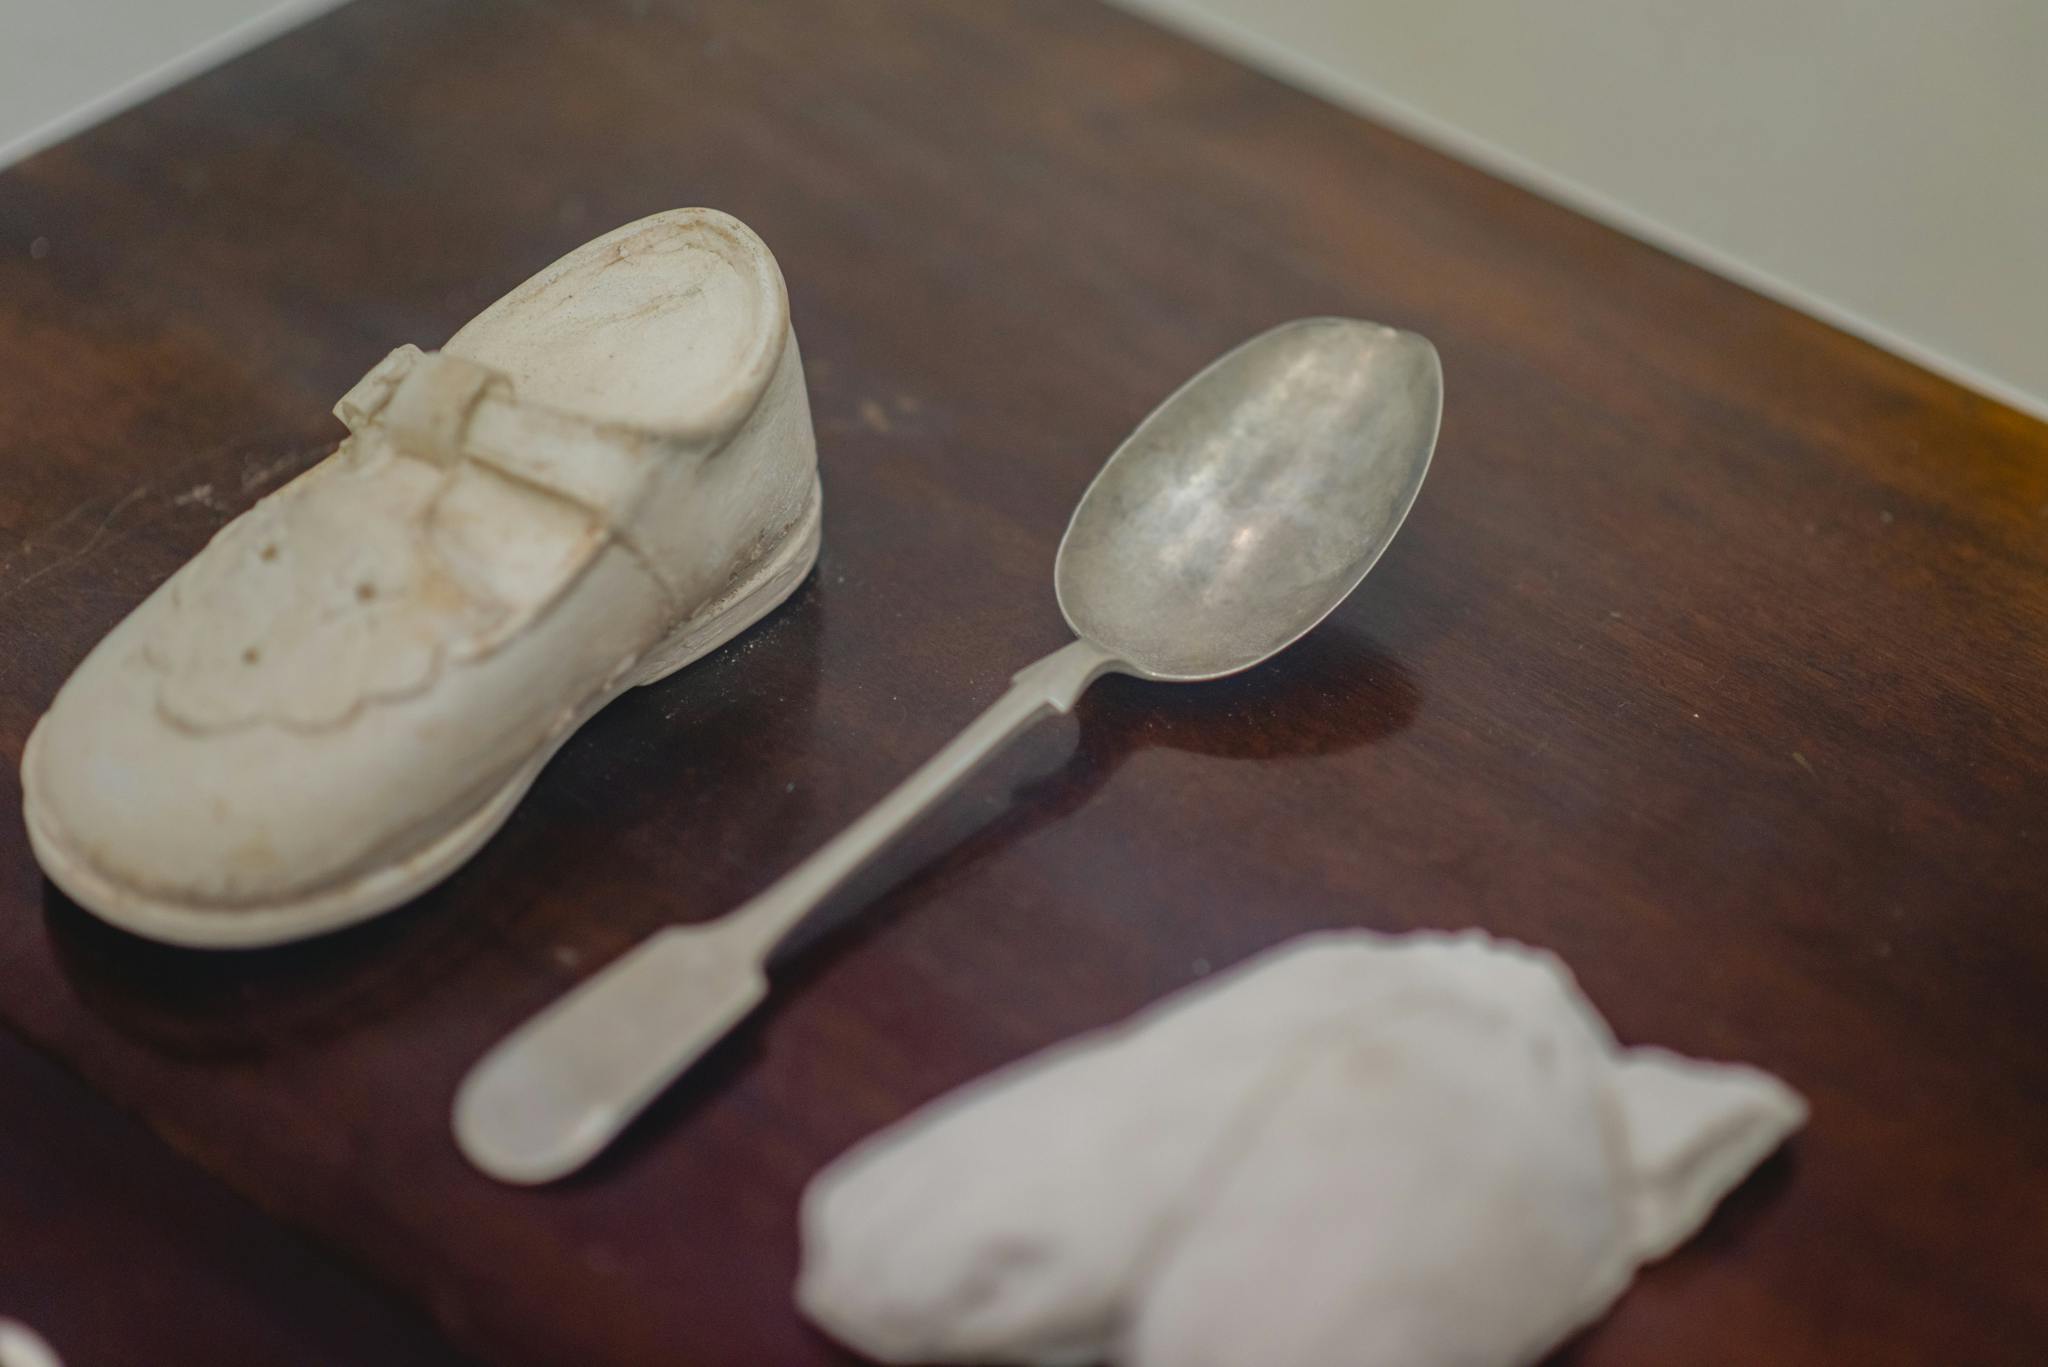 Image shows small objects on a wooden table, a small child's shoe, a spoon and something in the foreground that is too blurry to describe